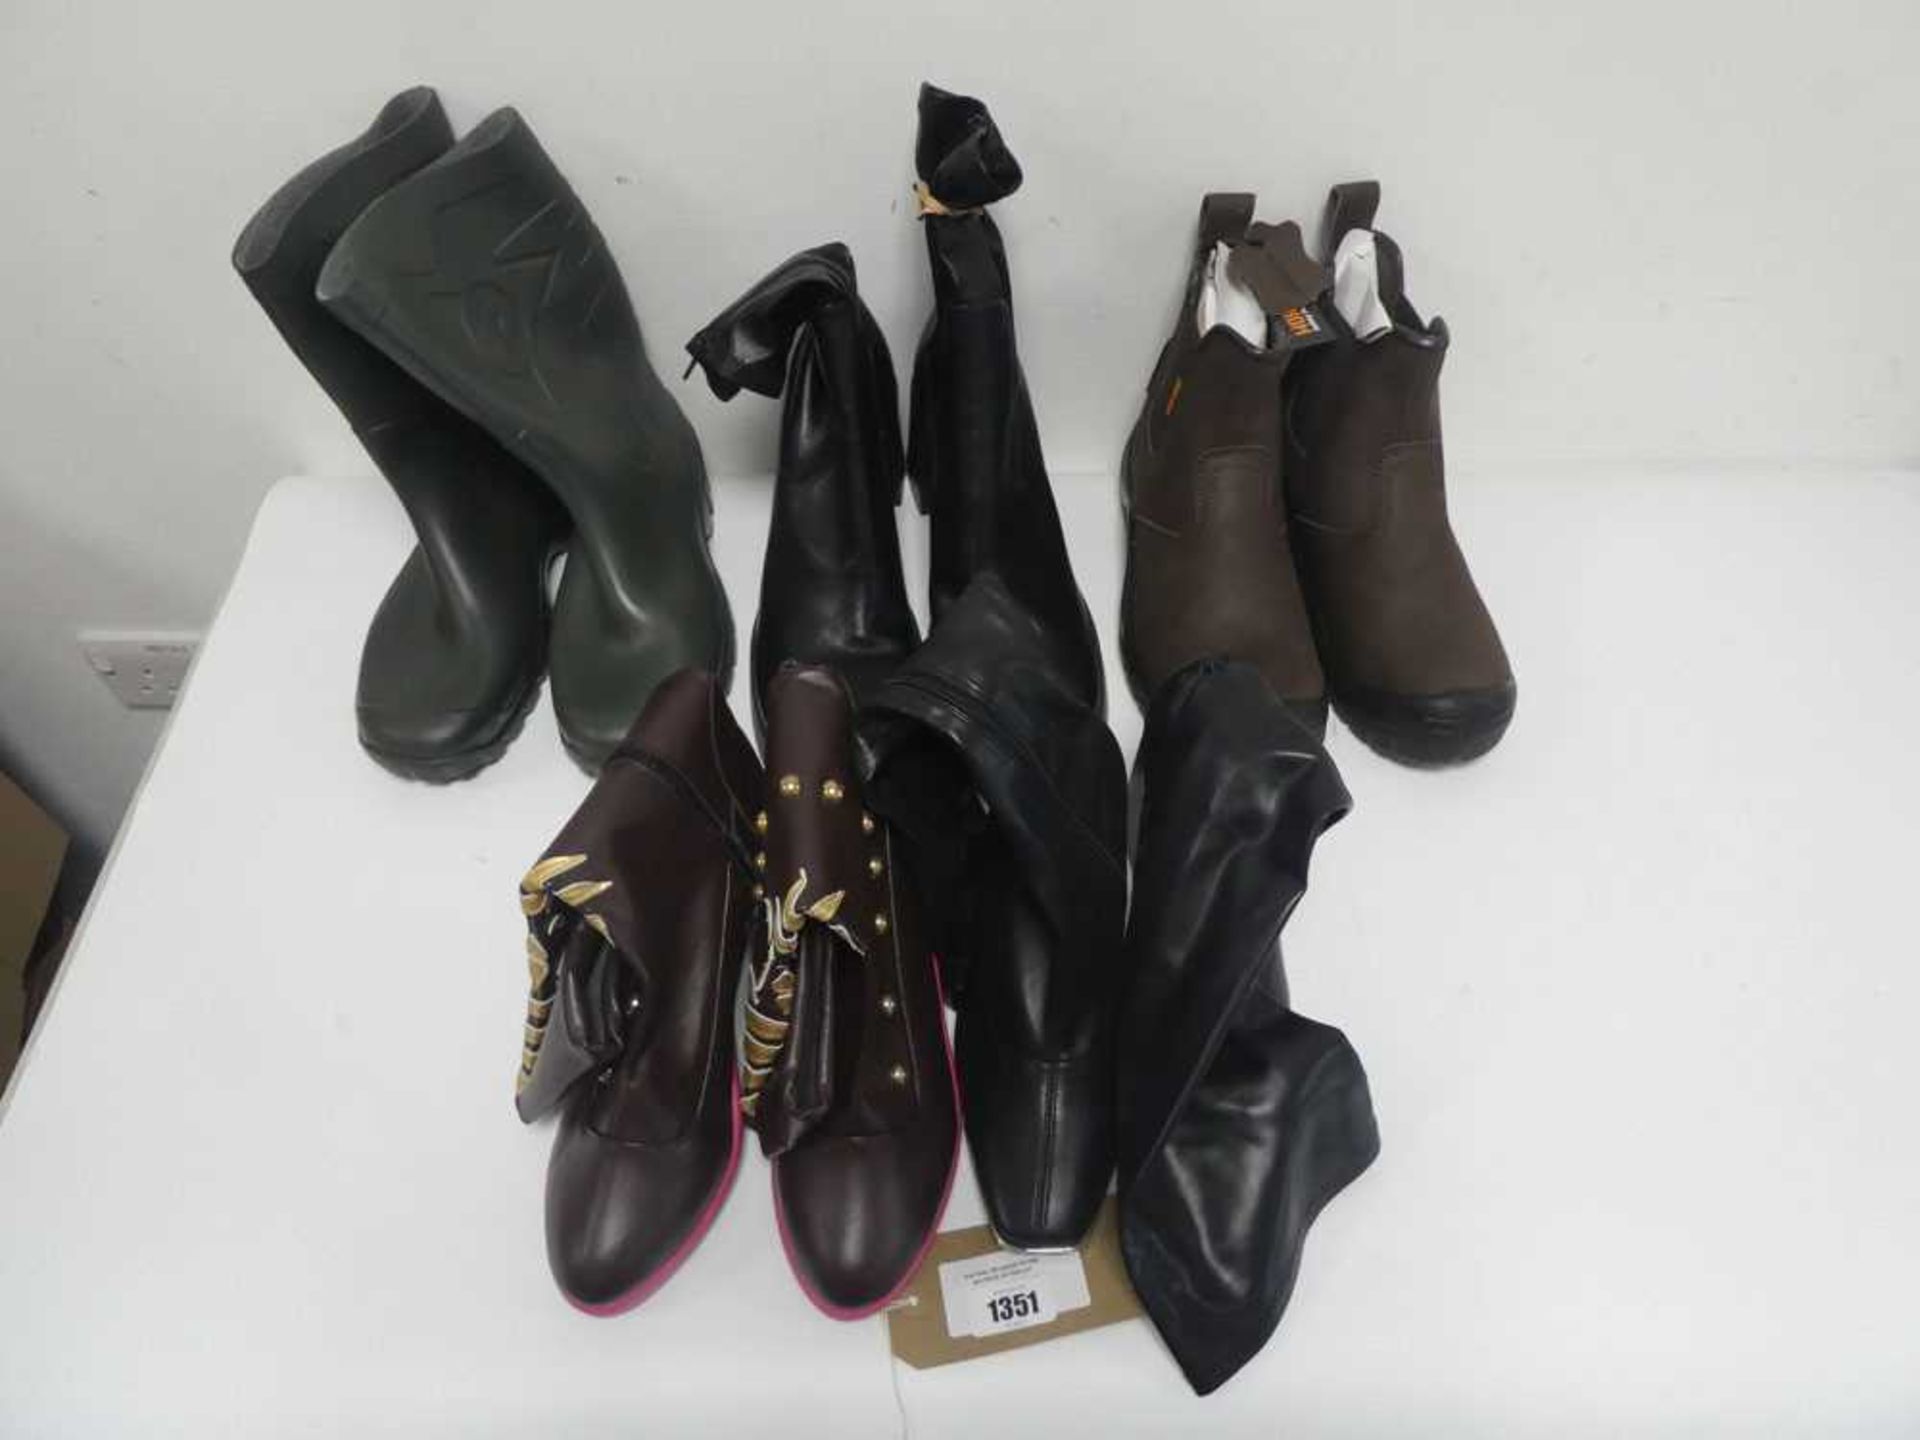 +VAT 5 pairs of boots in various styles and sizes to include wellies, heeled boots etc